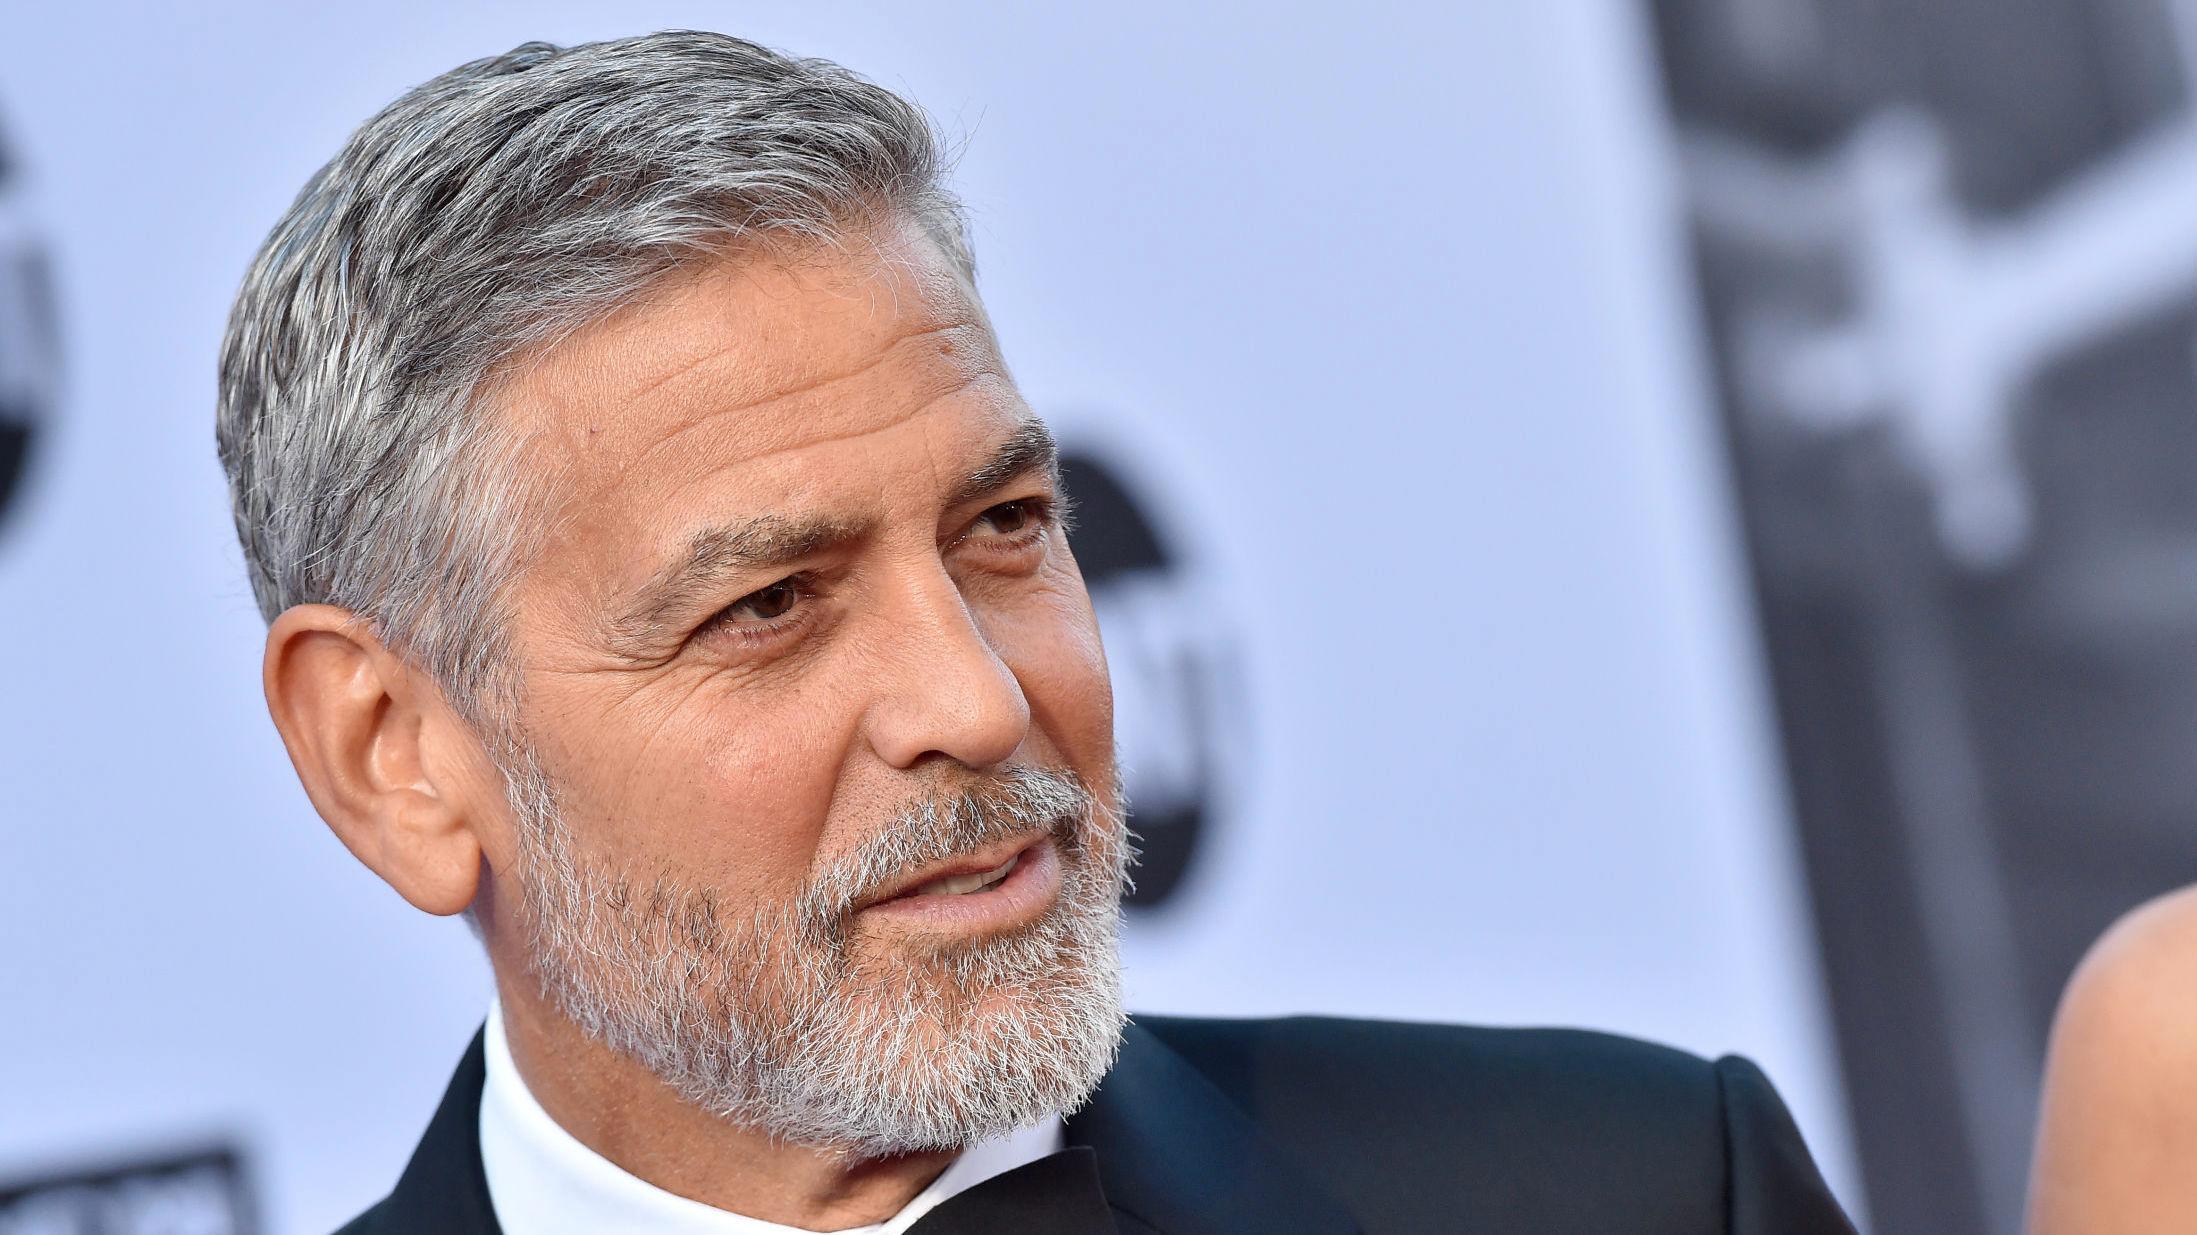 TEQUILA-SUKSESS: George Clooney solgte tequila-selskapet sitt for en milliard dollar i fjor. Foto: Axelle/Bauer-Griffin/Getty Images